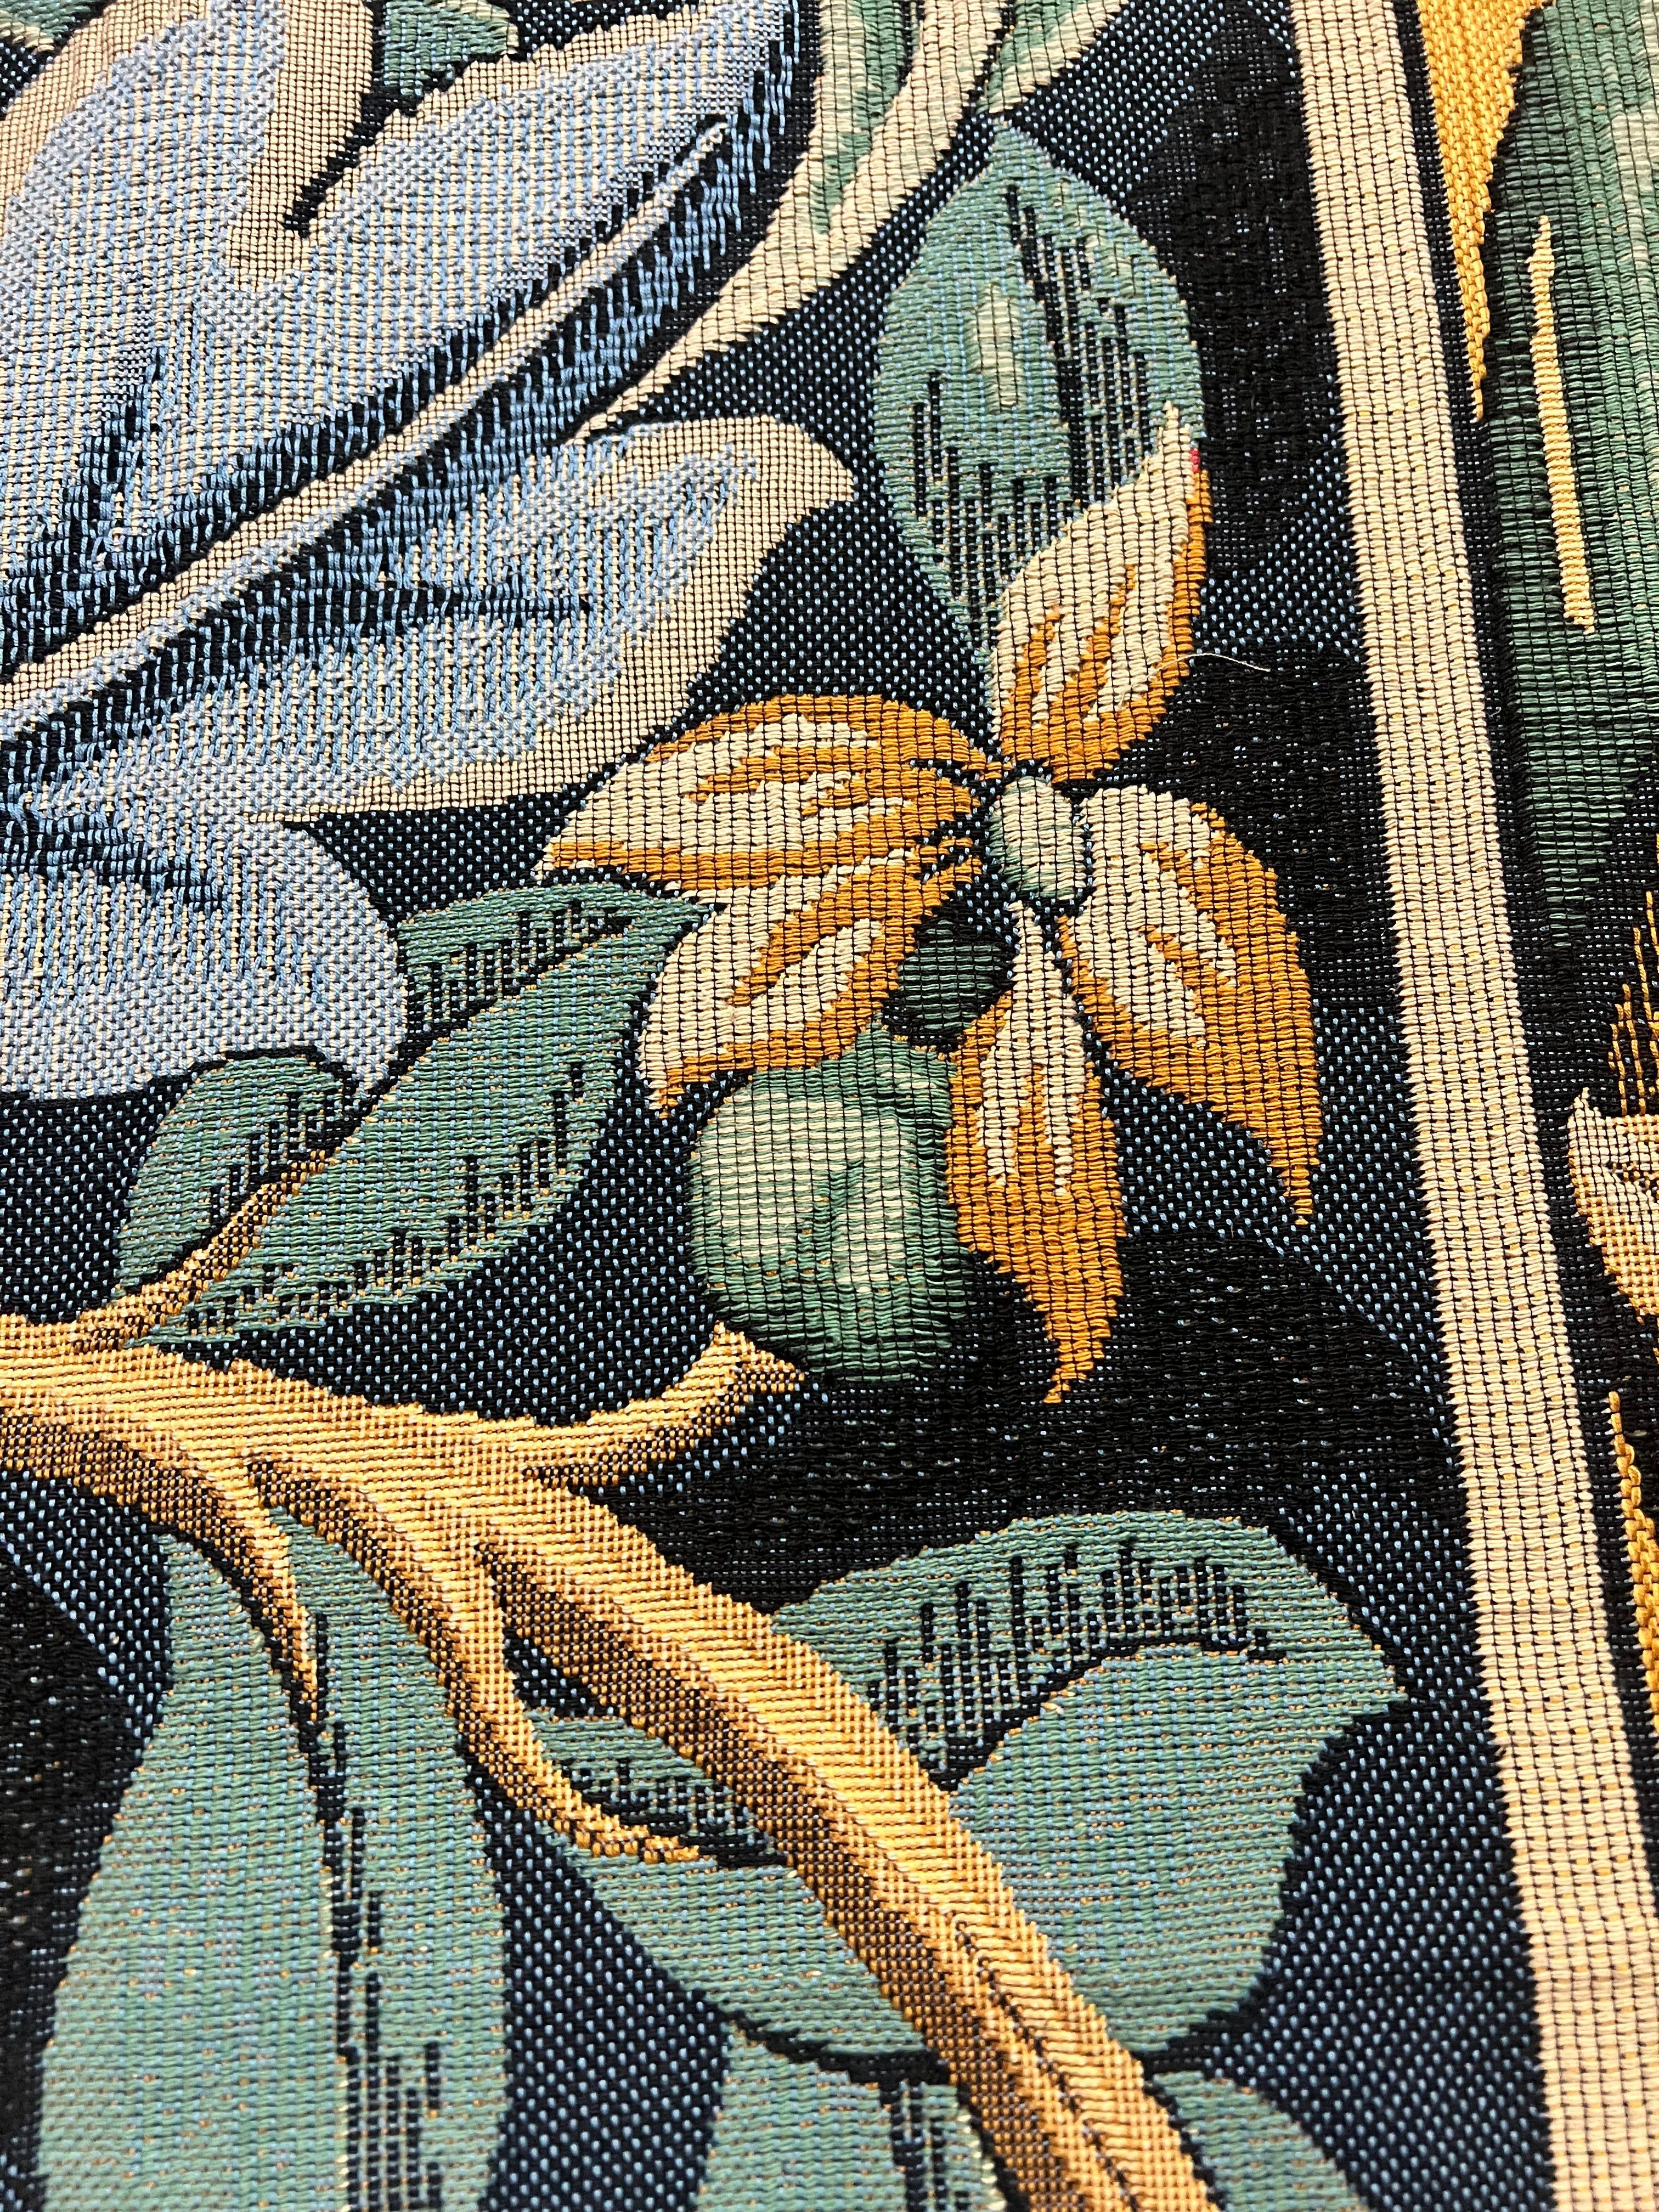 This tapestry is based on a design by William Morris (1834-1896). He was instrumental in the revival of the decorative arts at the end of the 19th century. 

This tapestry is French made,  Jacquard woven with relief stitch. It is fully lined with